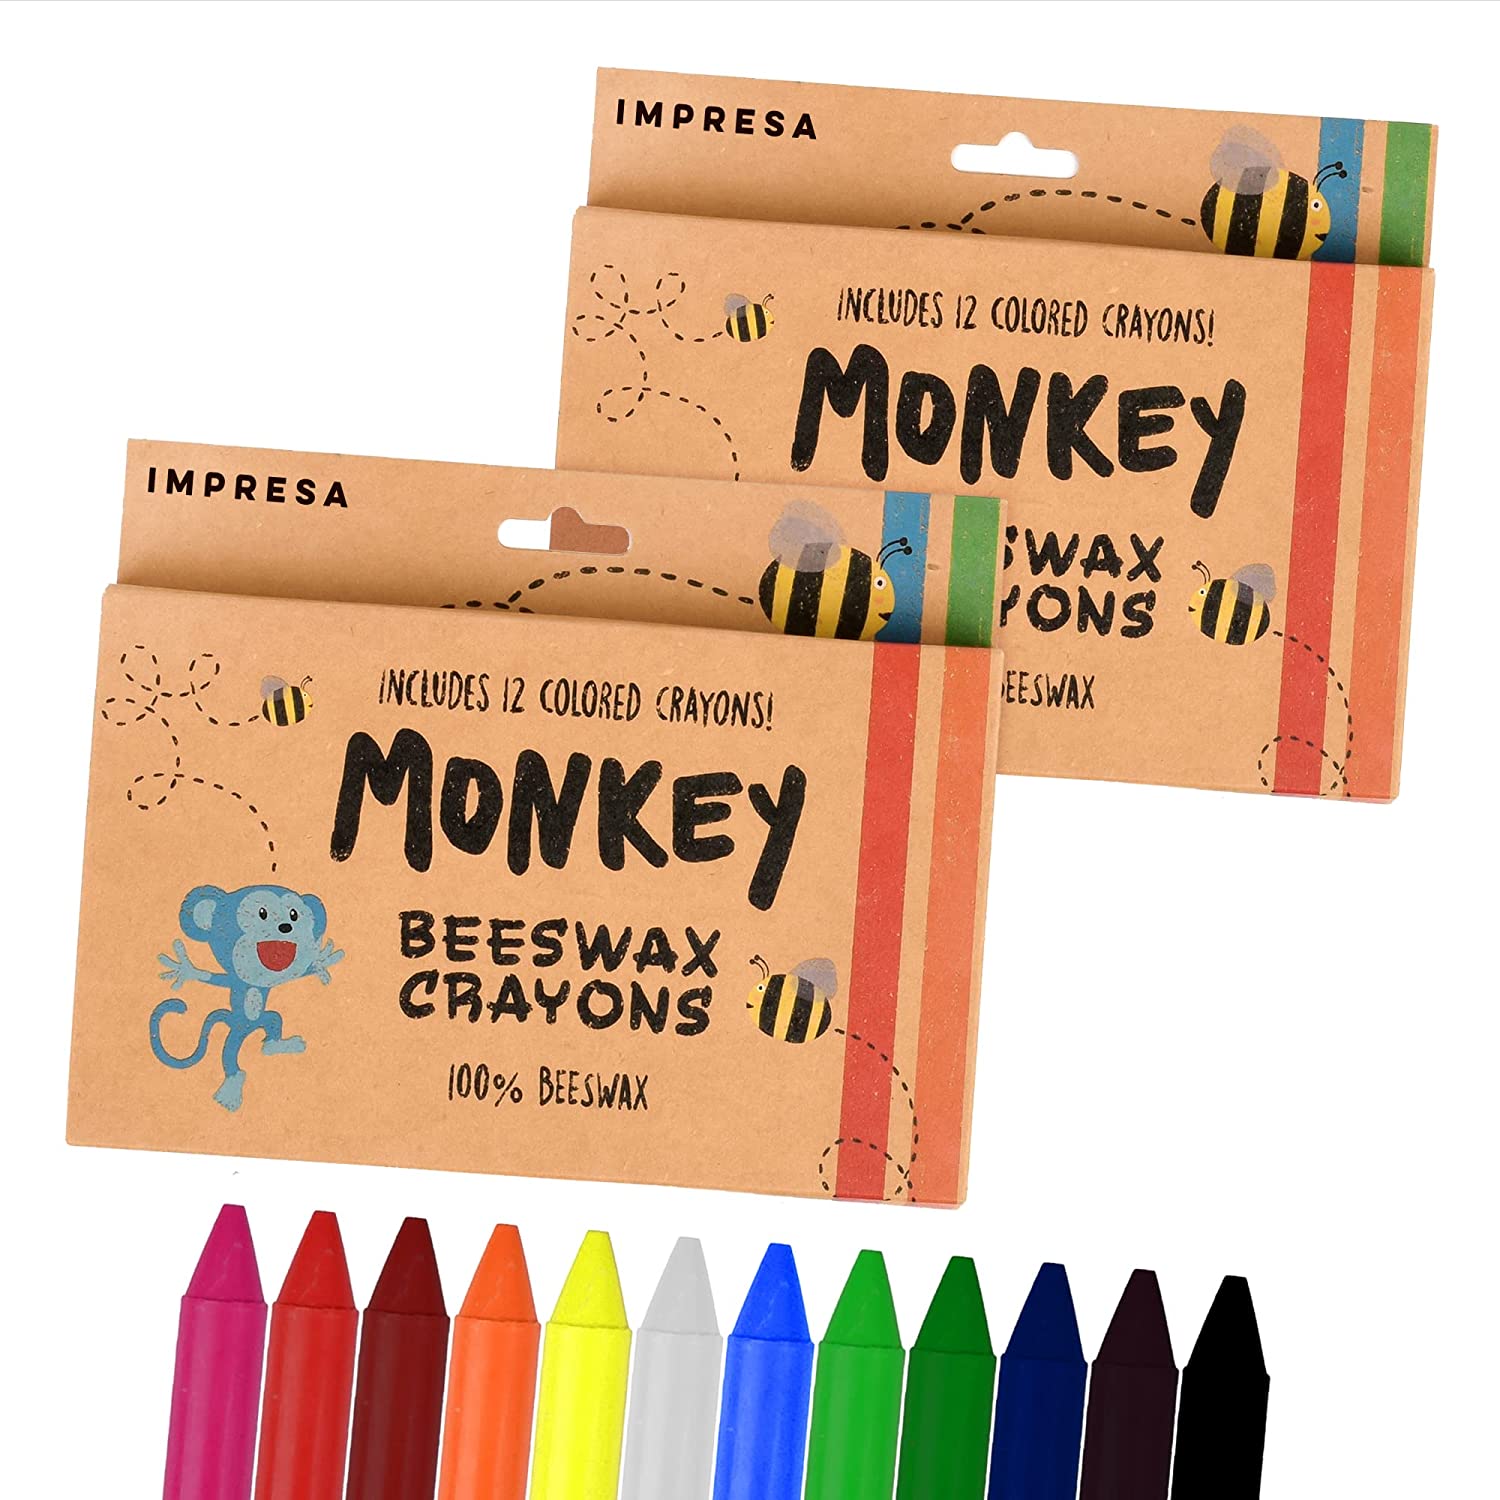 2-Pack Natural Beeswax Crayons for Toddlers and Kids - Kid